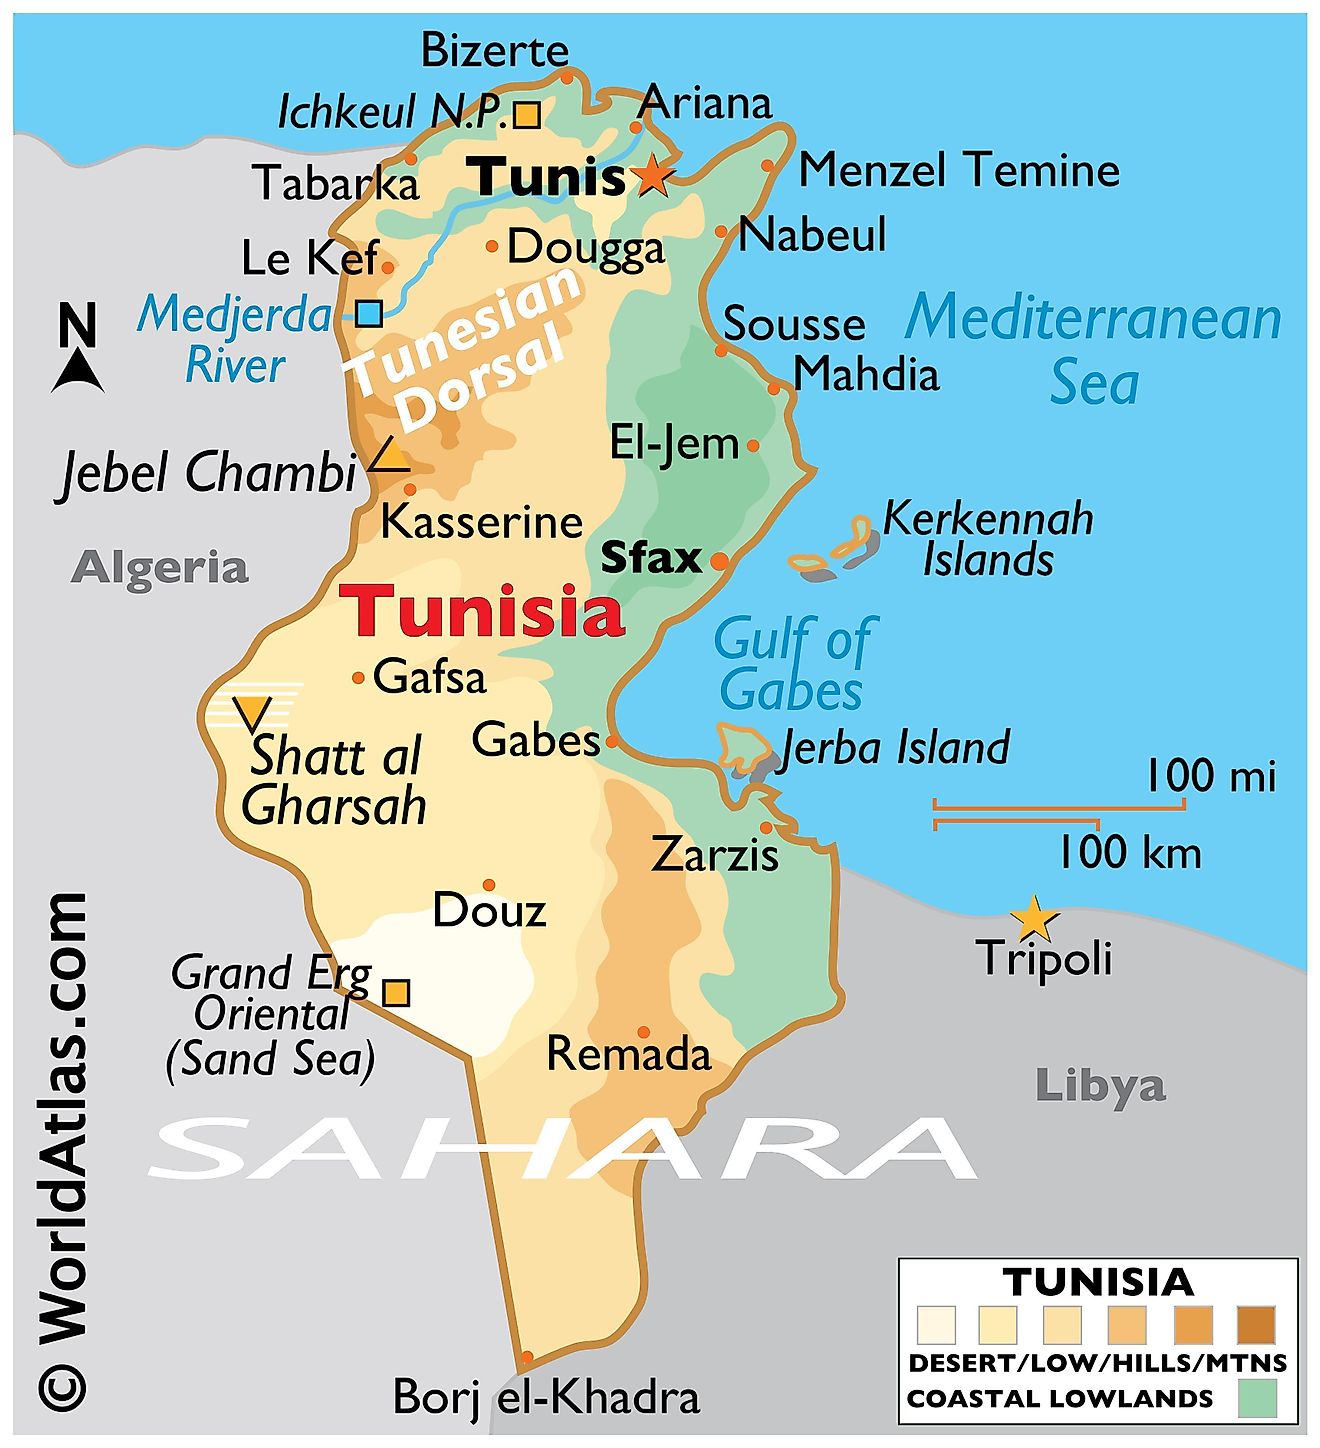 Phyiscal Map of Tunisia With State Boundaries. It shows the physical features of the Tunisia including mountain ranges, rivers, and major lakes, relative location of major cities, and more.